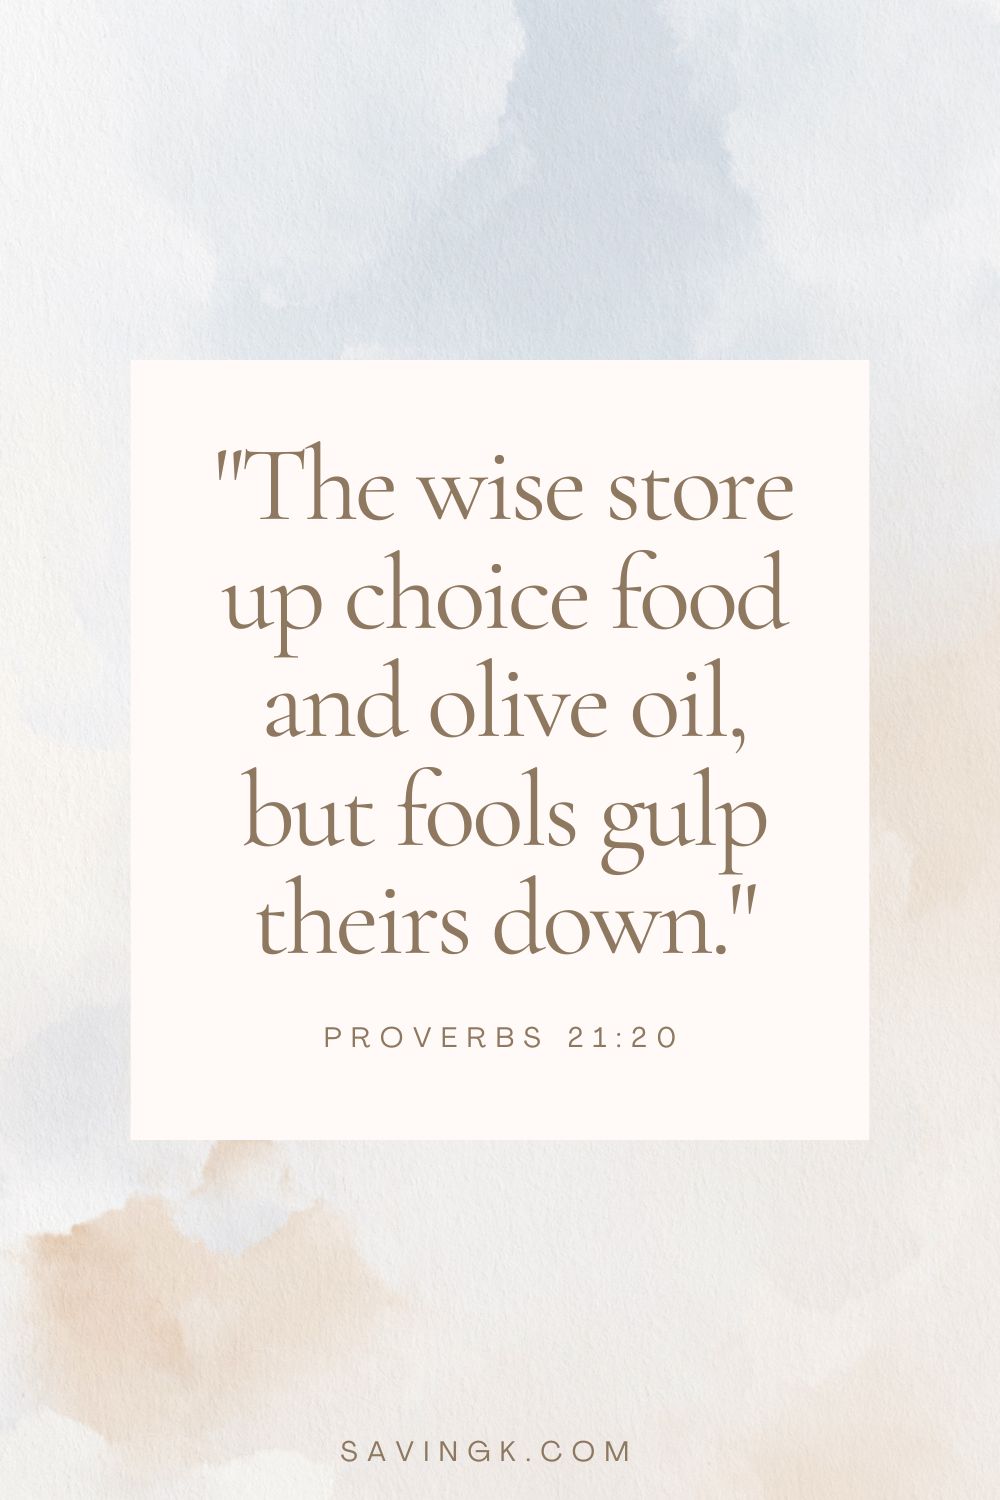 The wise store up choice food and olive oil, but fools gulp theirs down.